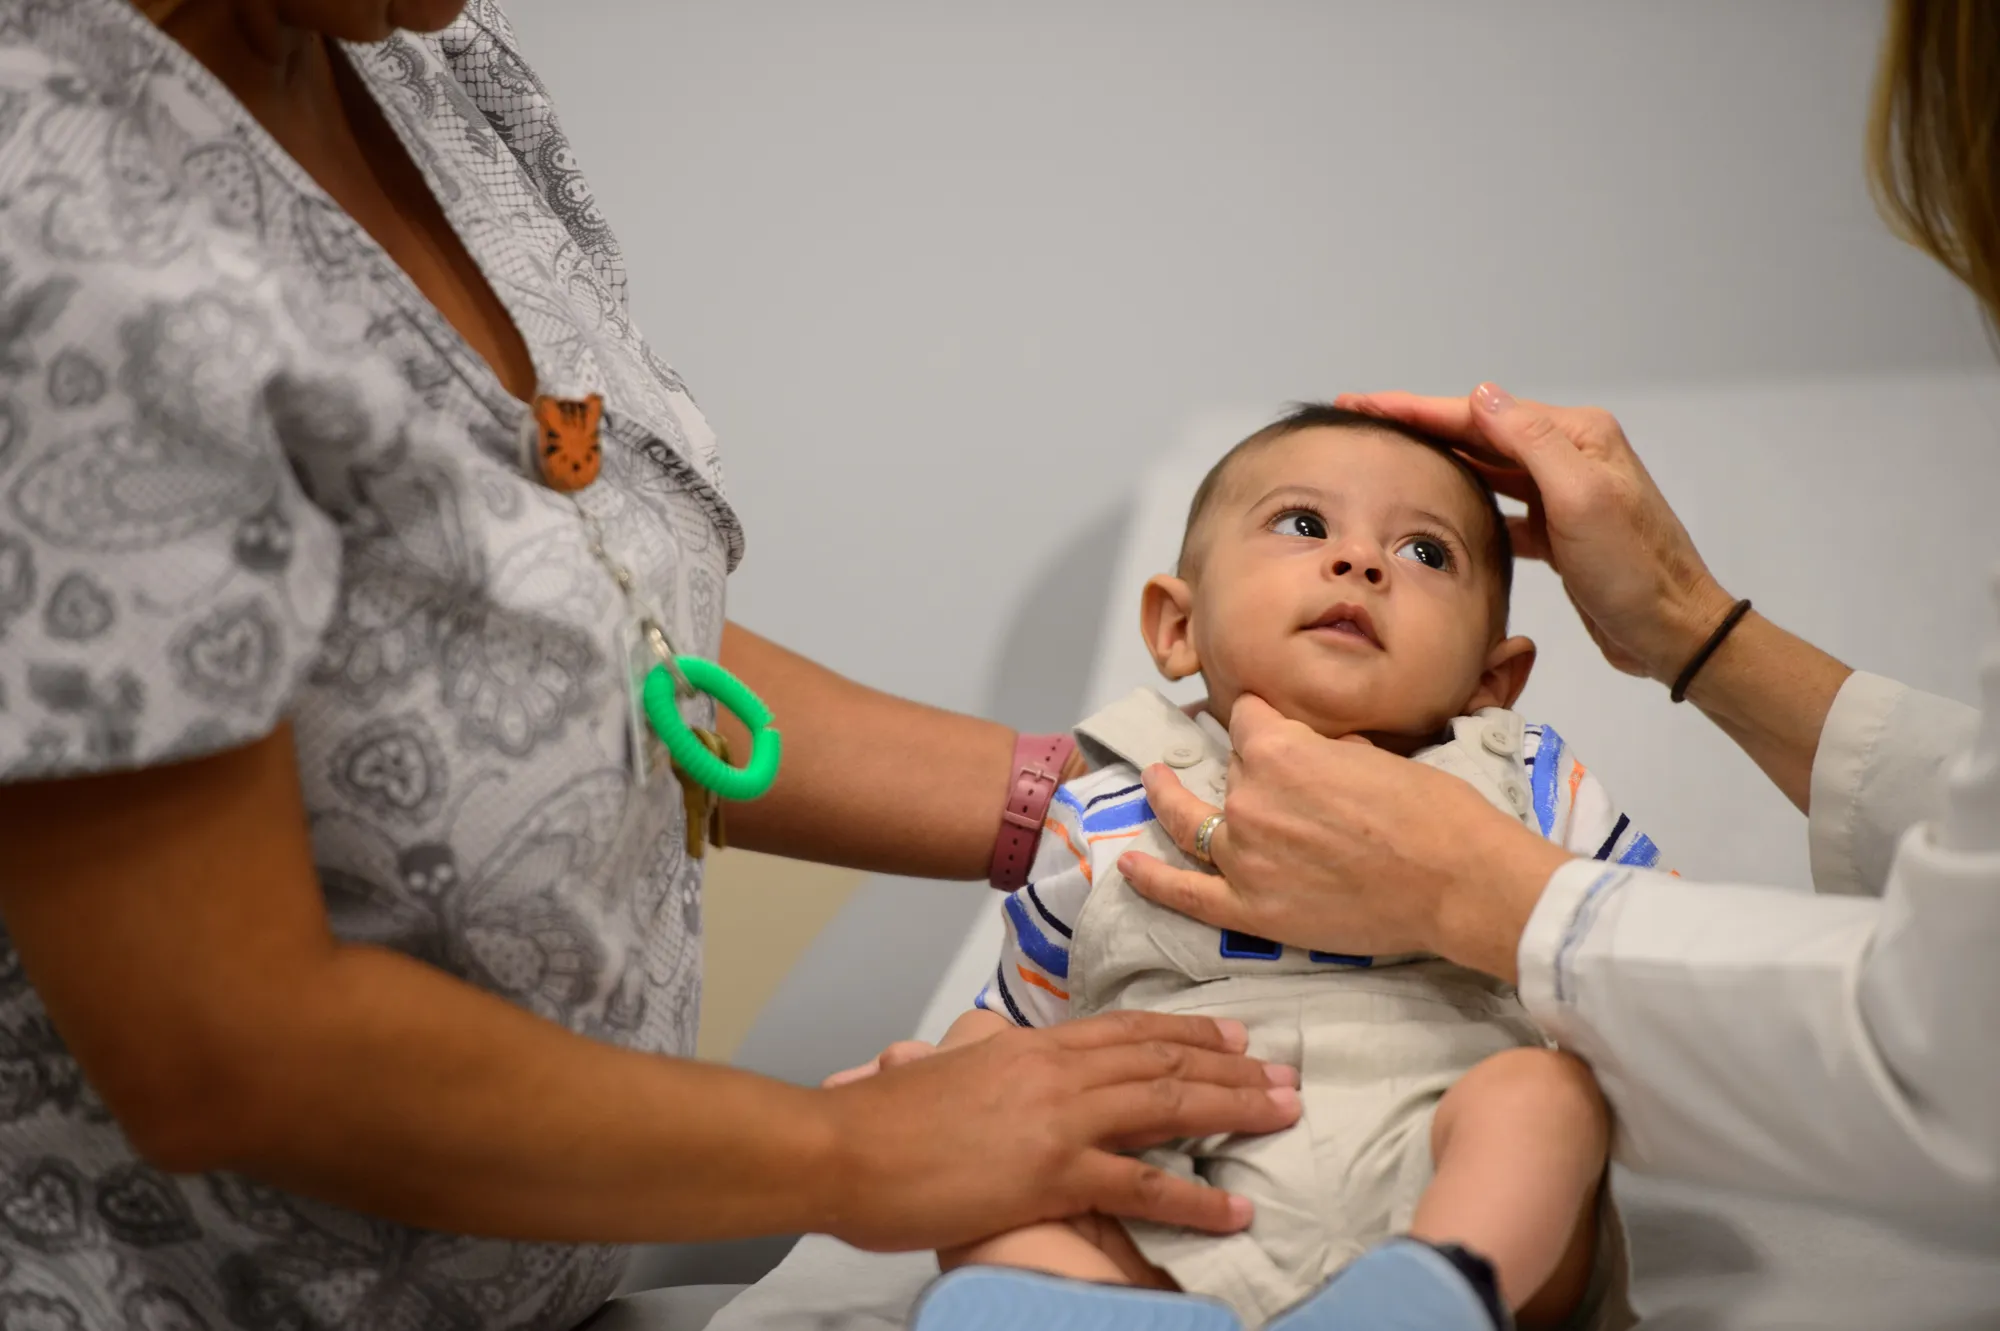 A baby being examined during a doctor's visit